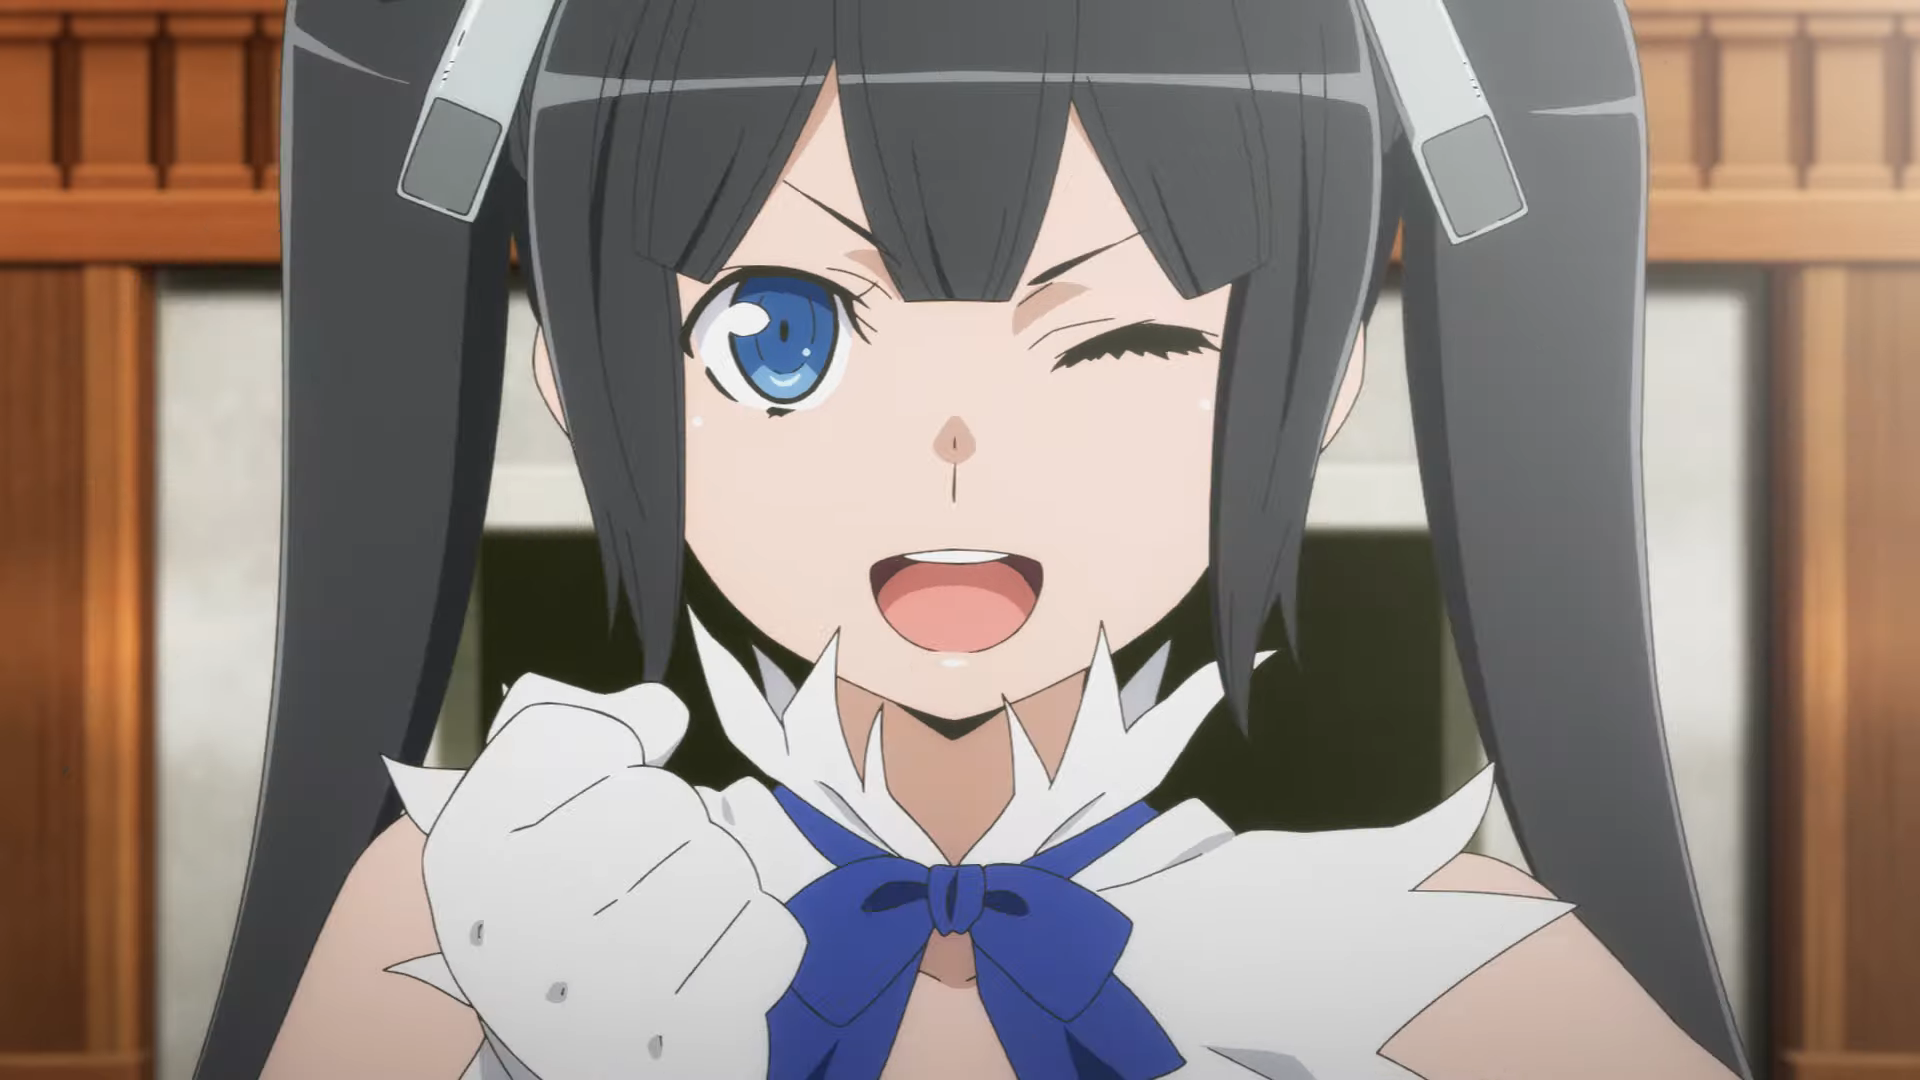 DanMachi Season 4 Gets New Trailer and More Cast Ahead of July 22 Premiere